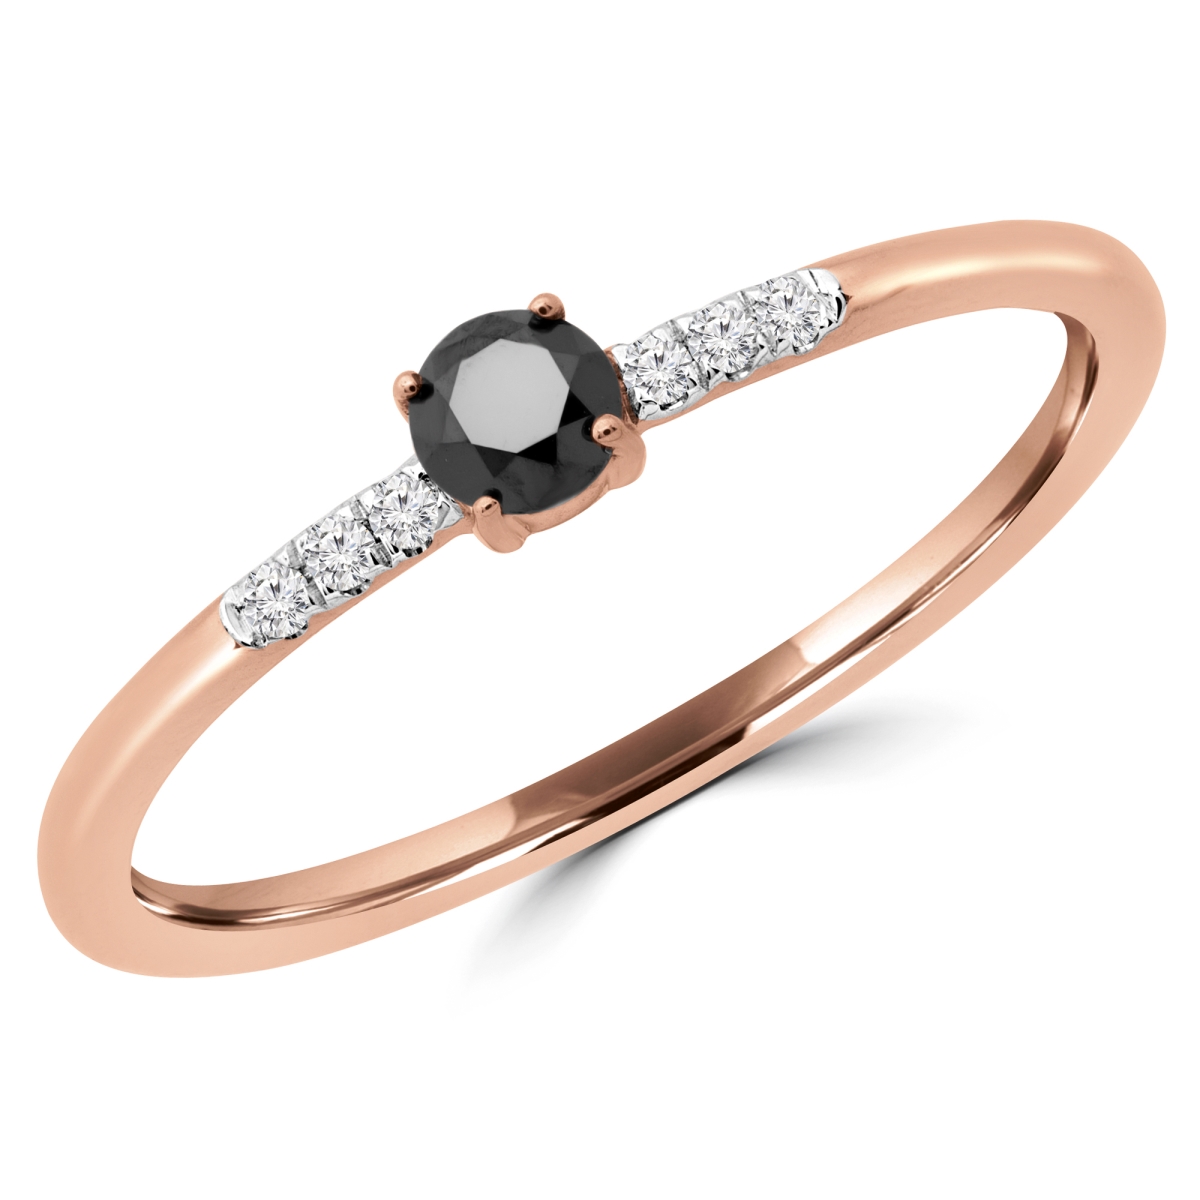 Picture of Majesty Diamonds MDR190079-7 0.16 CTW Round Black Diamond Bezel Set Cocktail Ring in 14K Rose Gold - Size 7